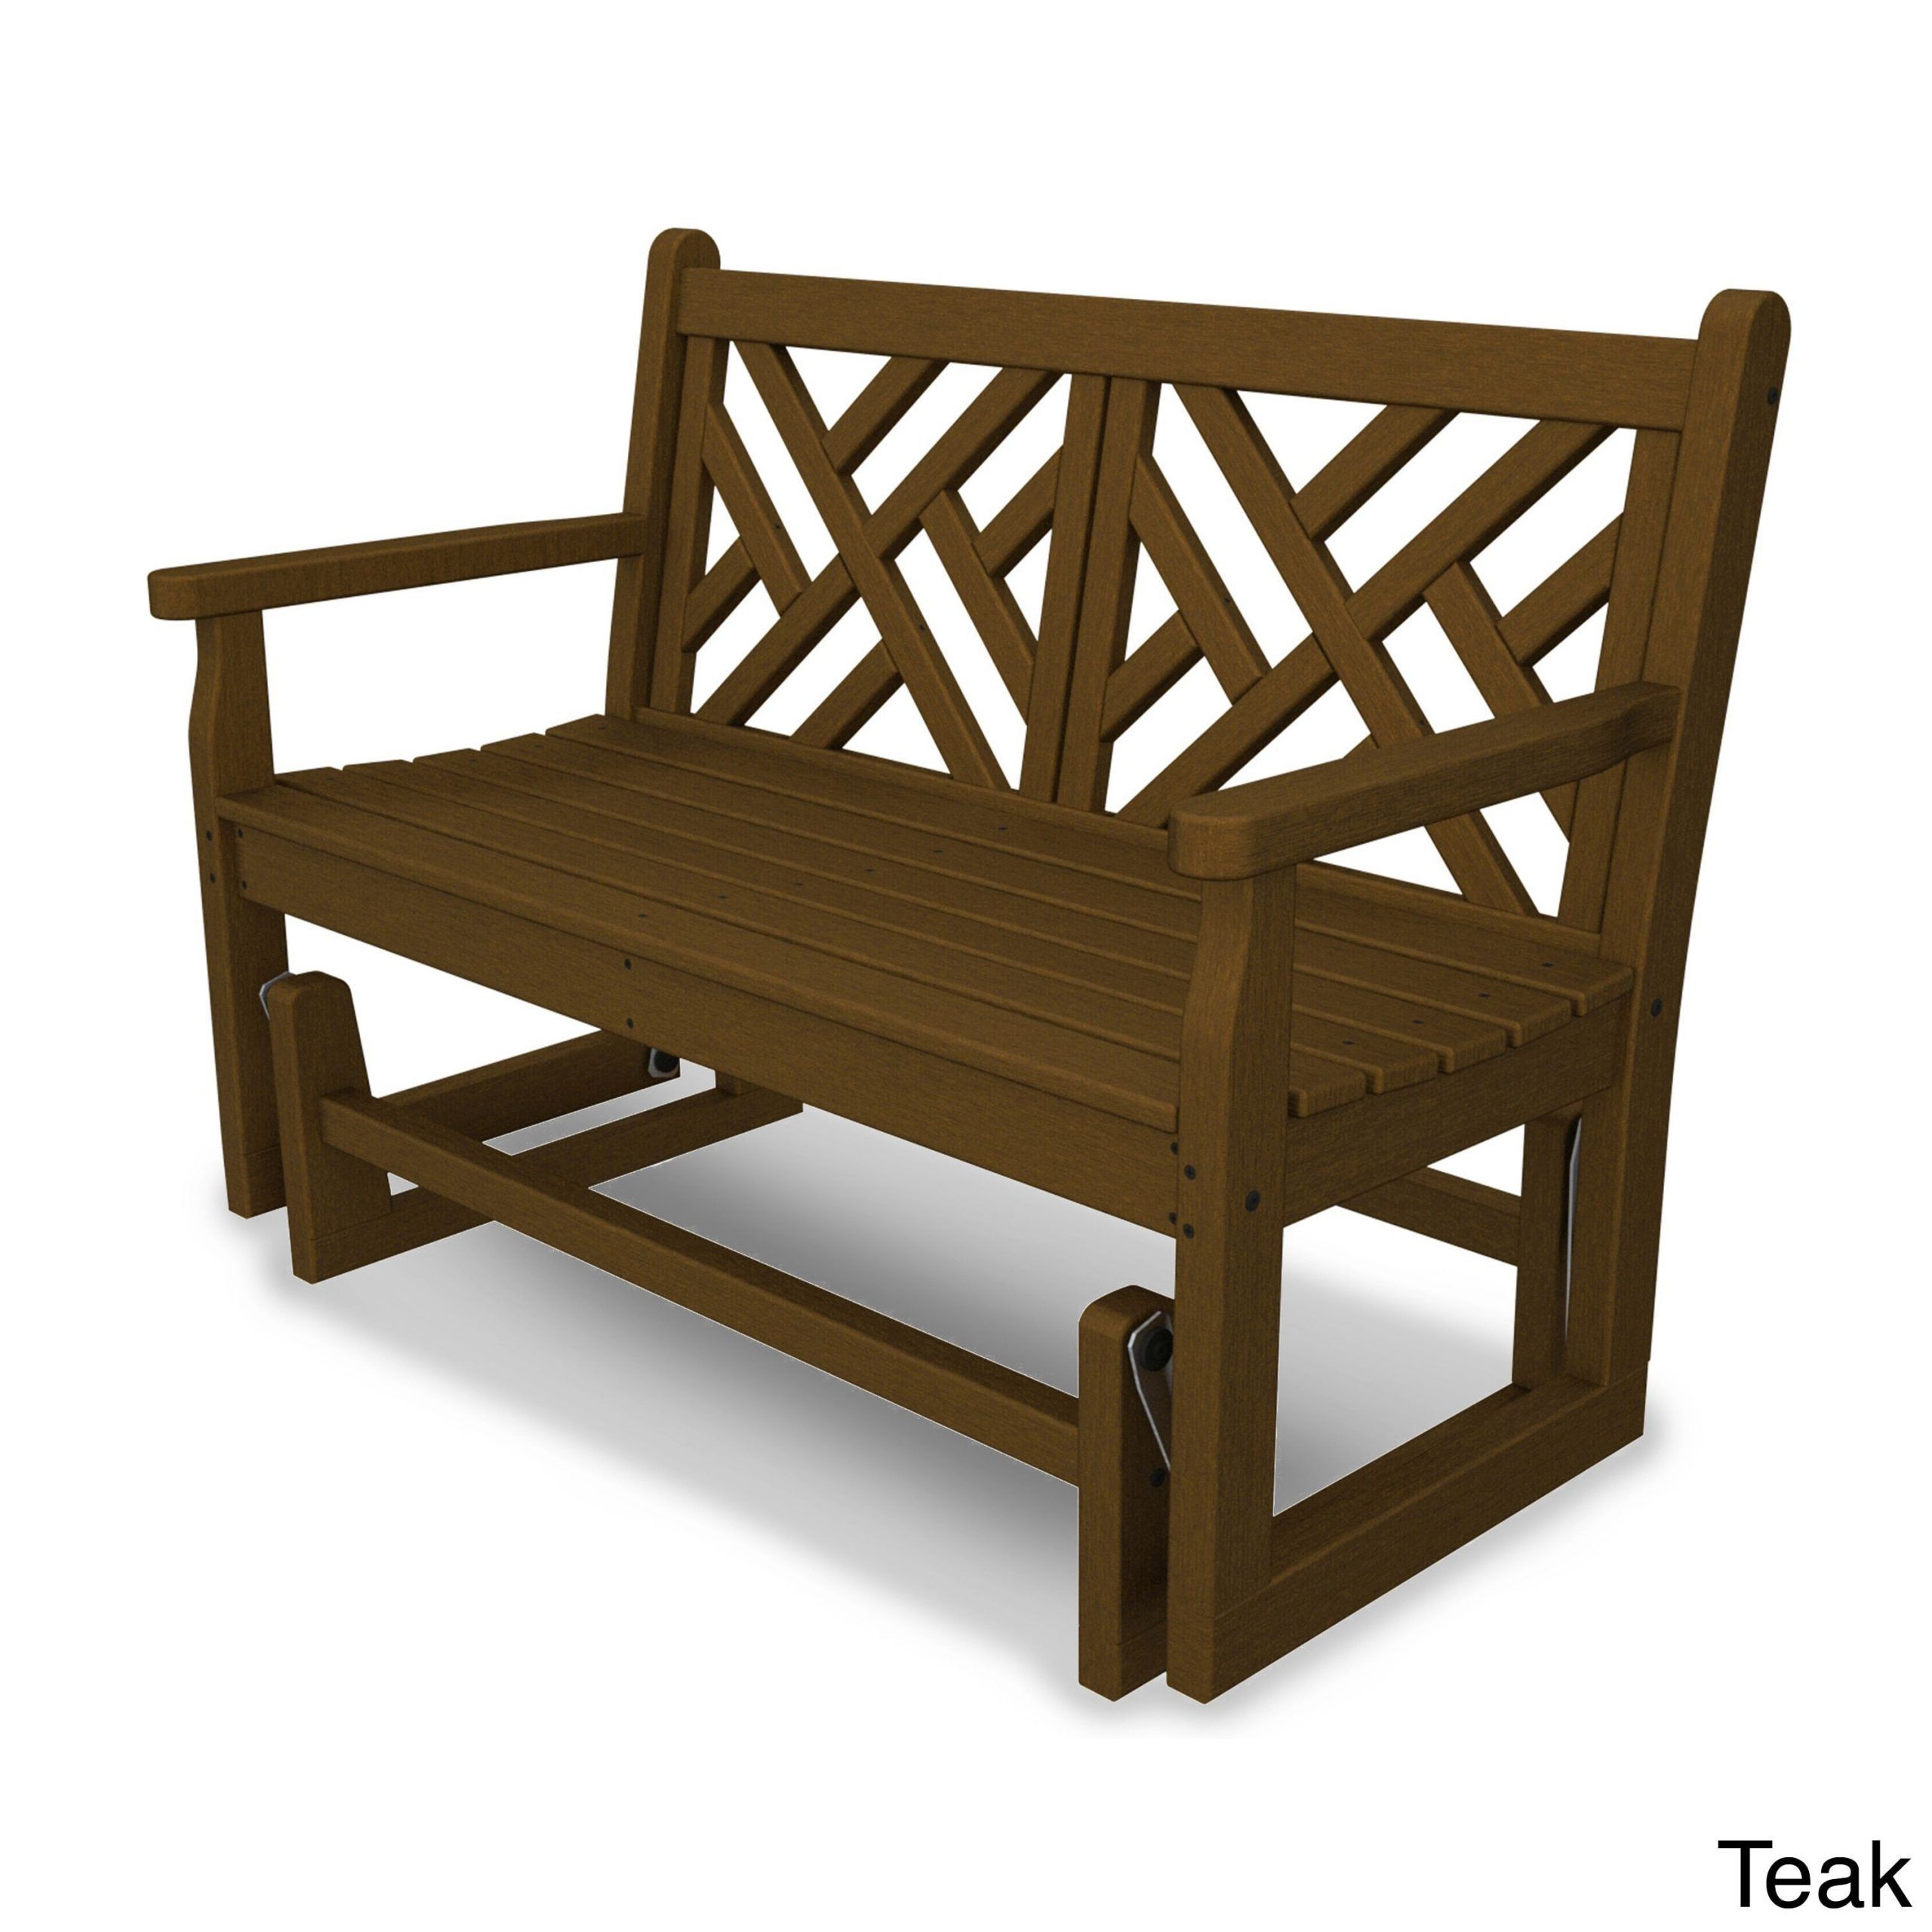 Chippendale Polywood Glider Bench (Teak), Brown, Patio With Regard To Teak Glider Benches (View 13 of 25)